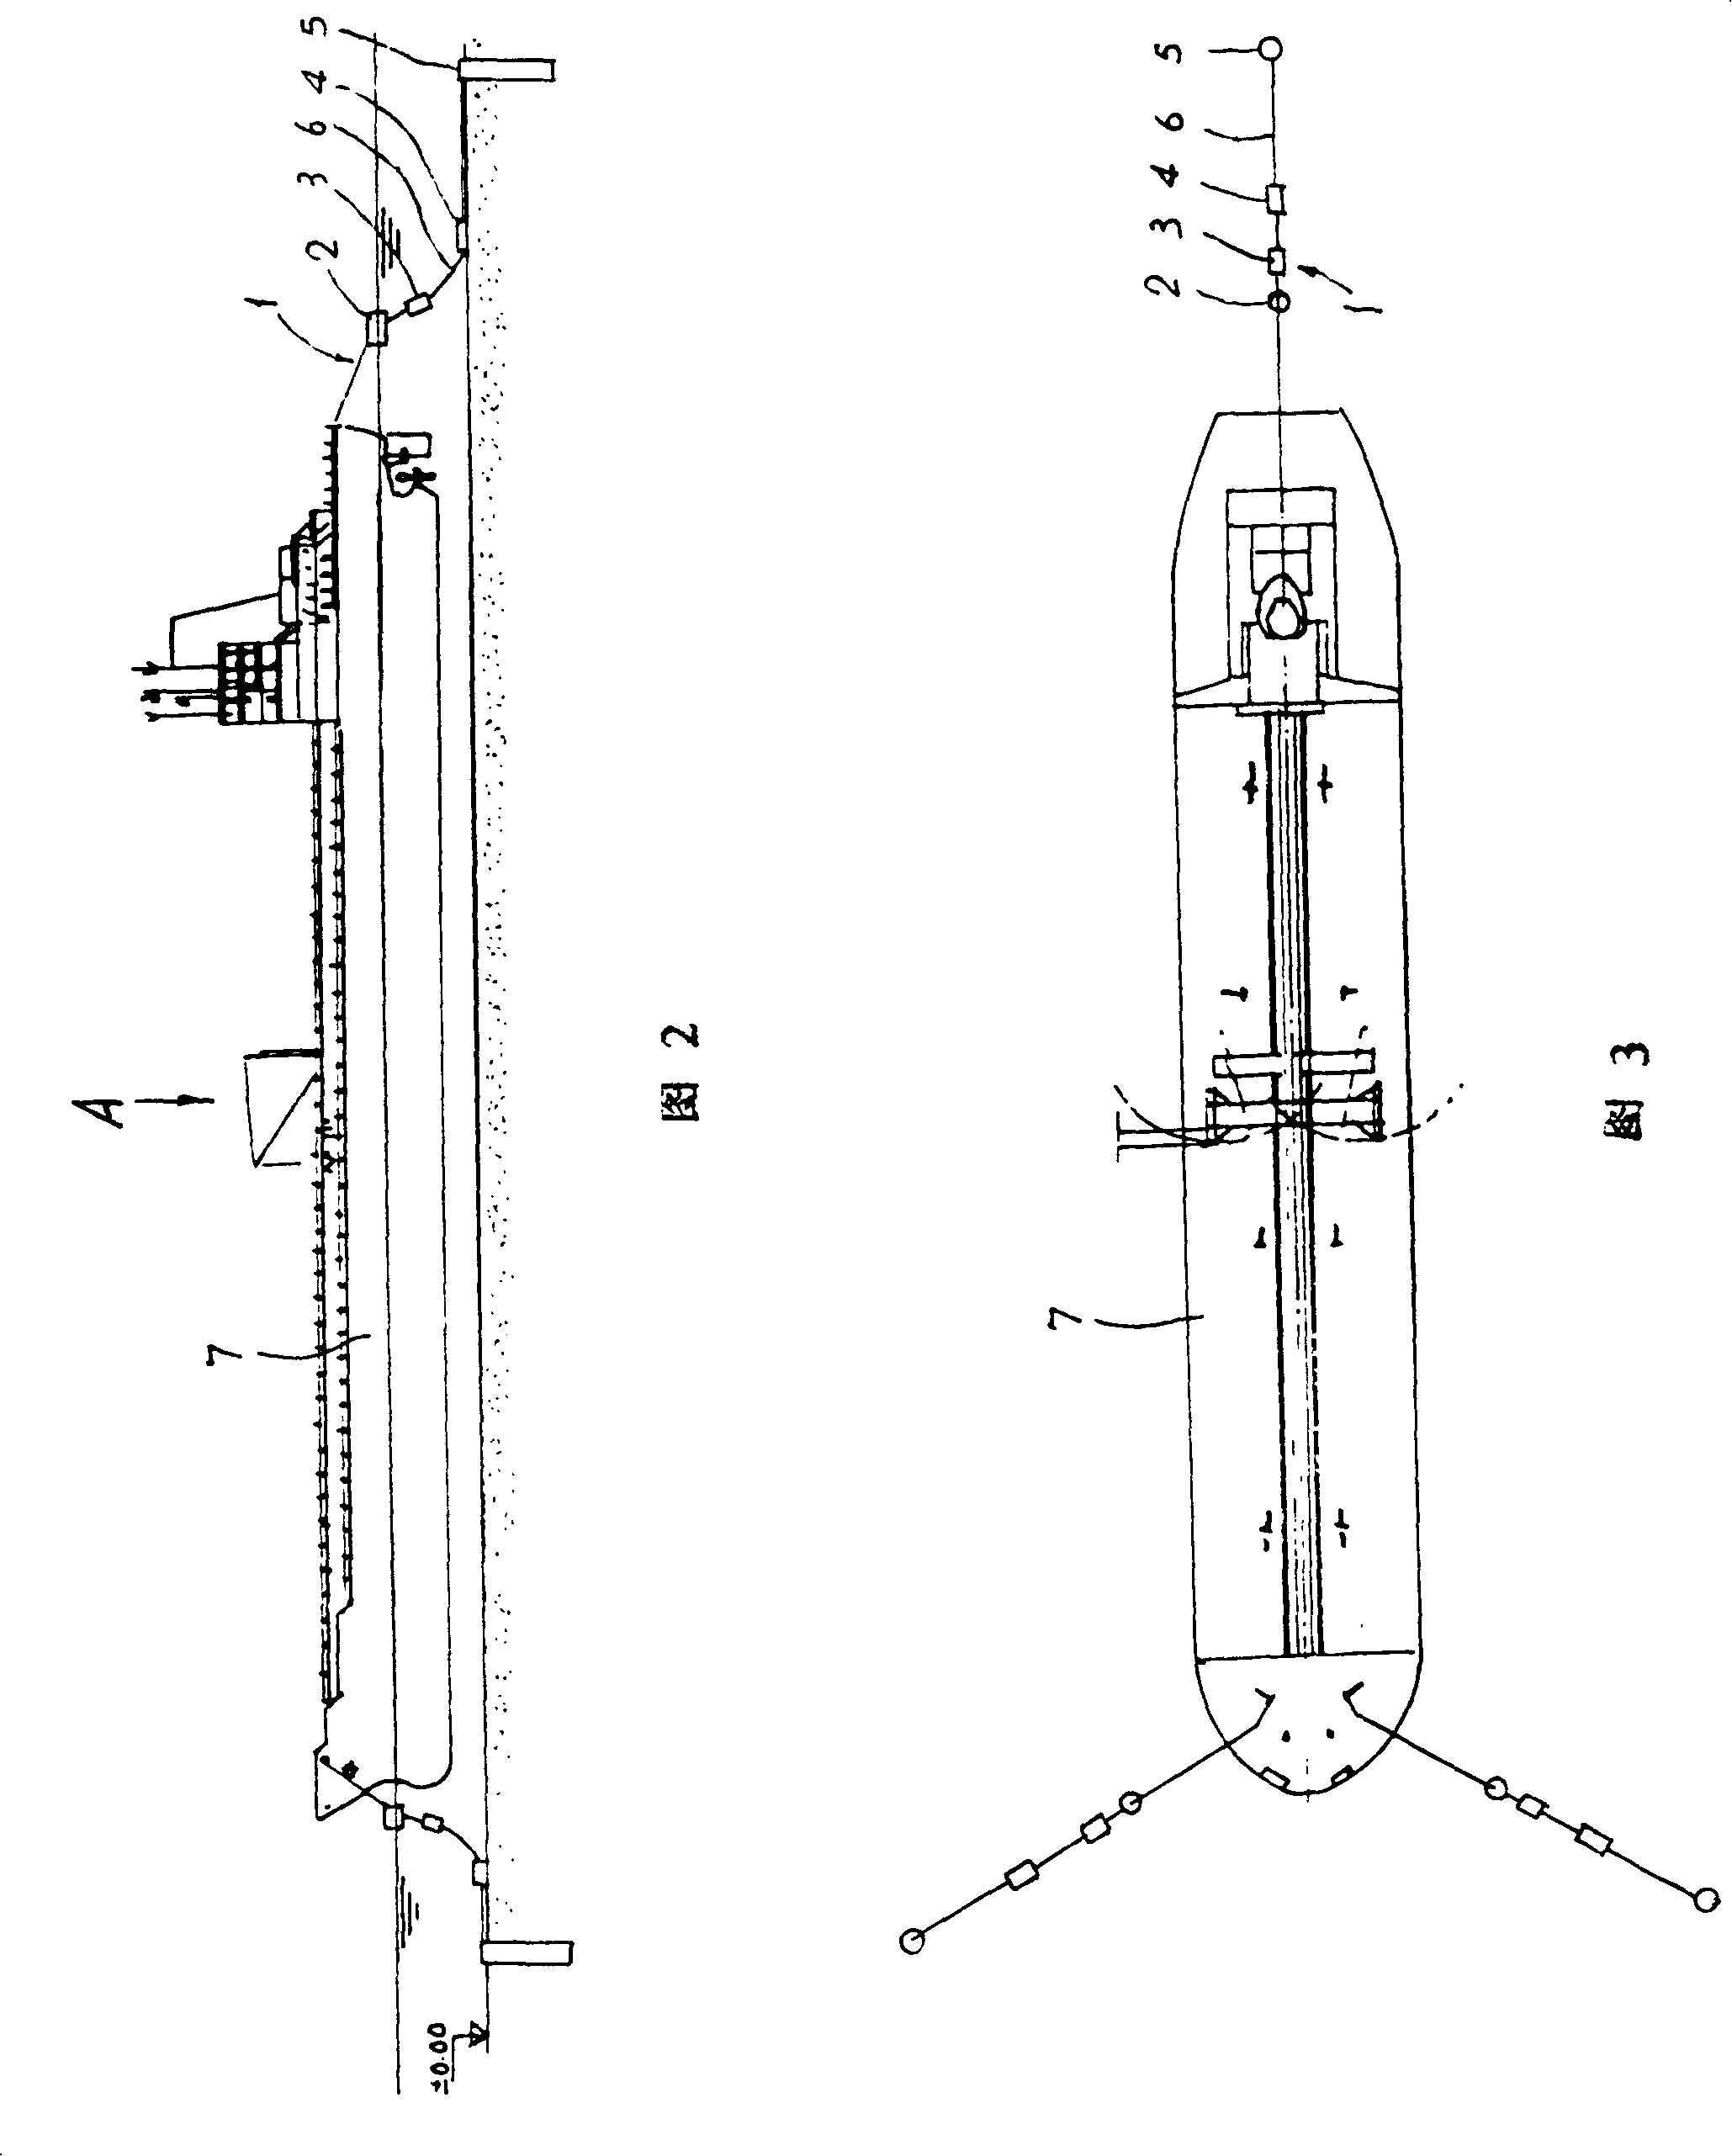 Off land loading and unloading anchoring system and anchoring method for liquid bulk cargo carrier